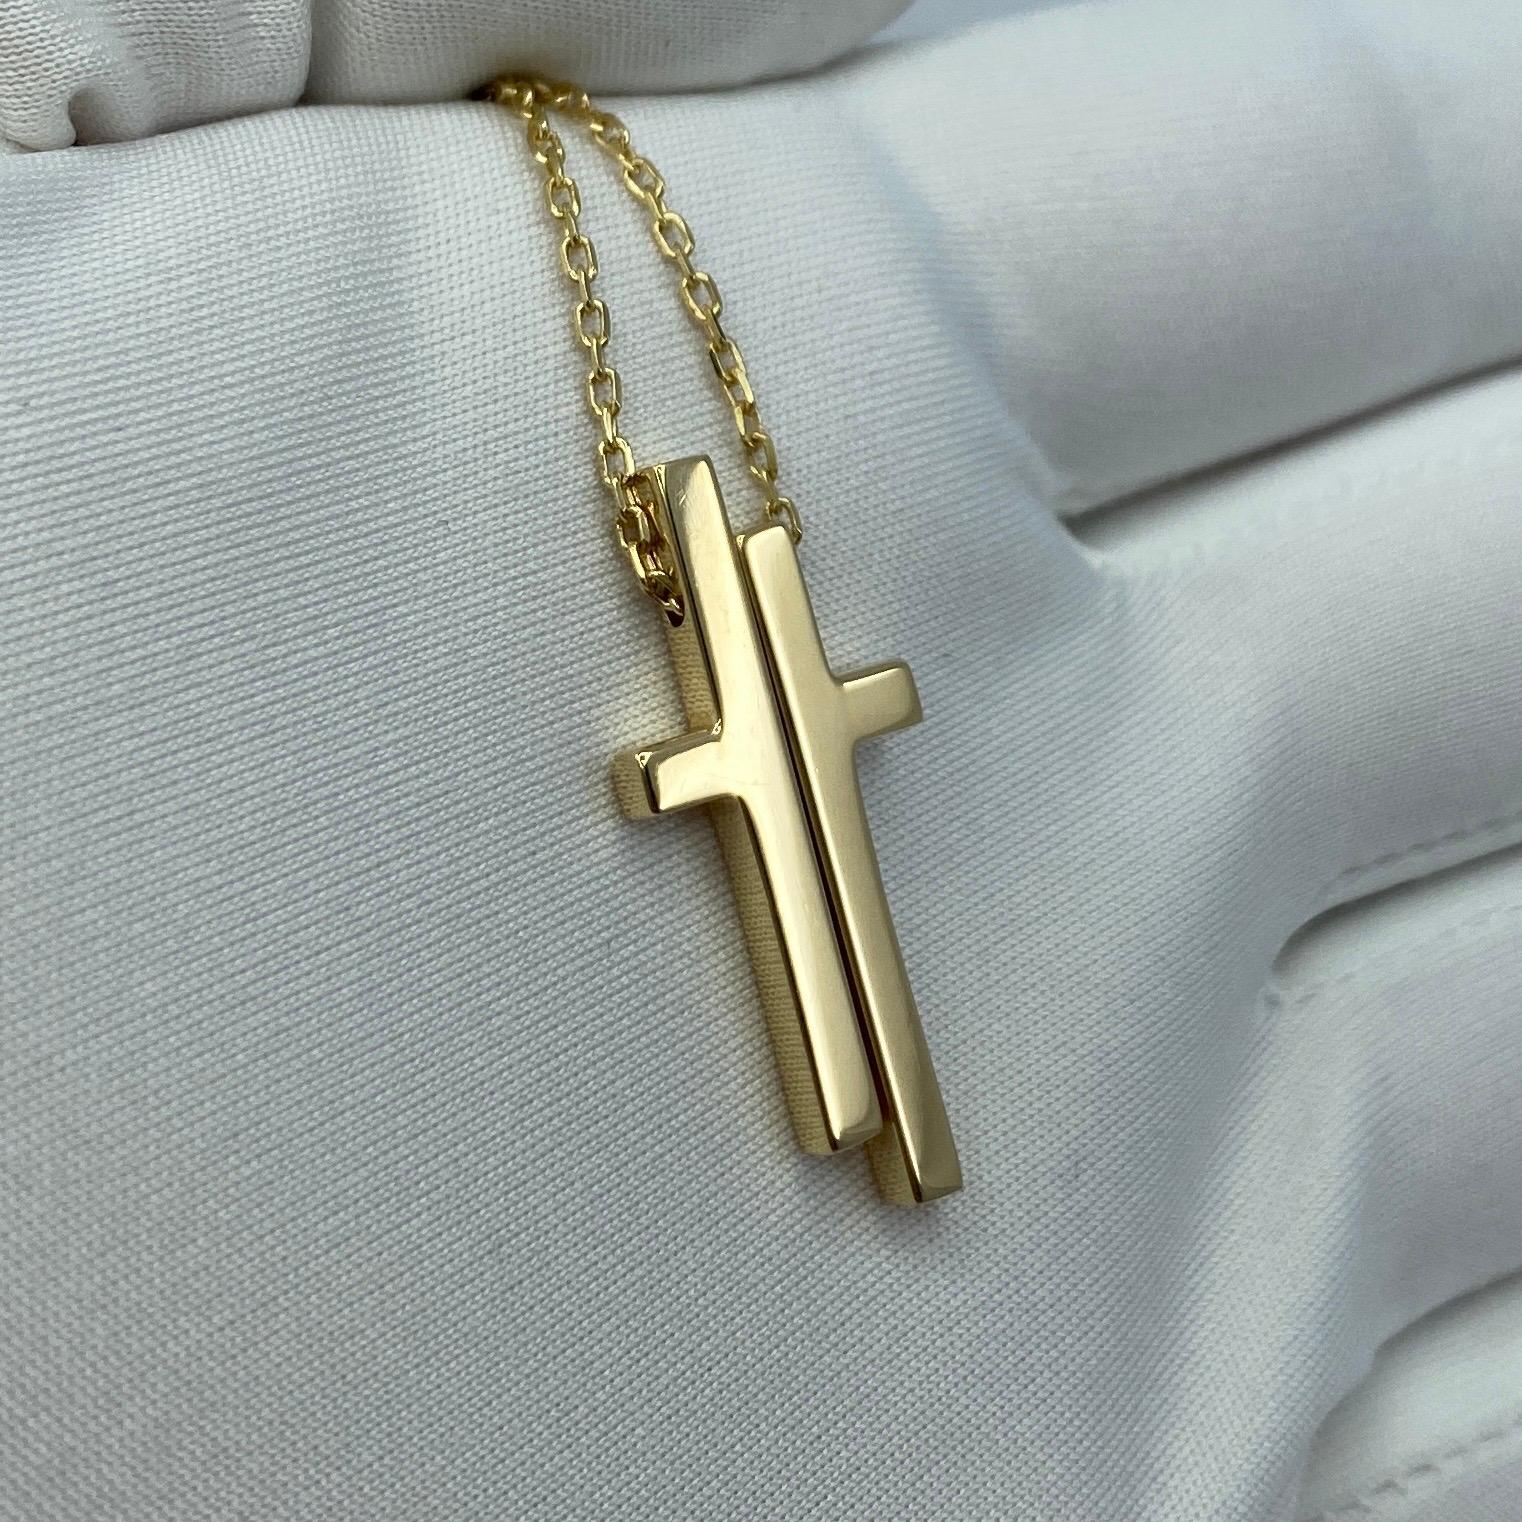 Vintage Gucci 18k Yellow Gold Split Cross Pendant Pendant Necklace.

Fine Gucci jewellery piece featuring a split design cross, hanging from an original Gucci 18' 45cm yellow gold chain.

Yellow gold of this piece is rare.

This item is practically